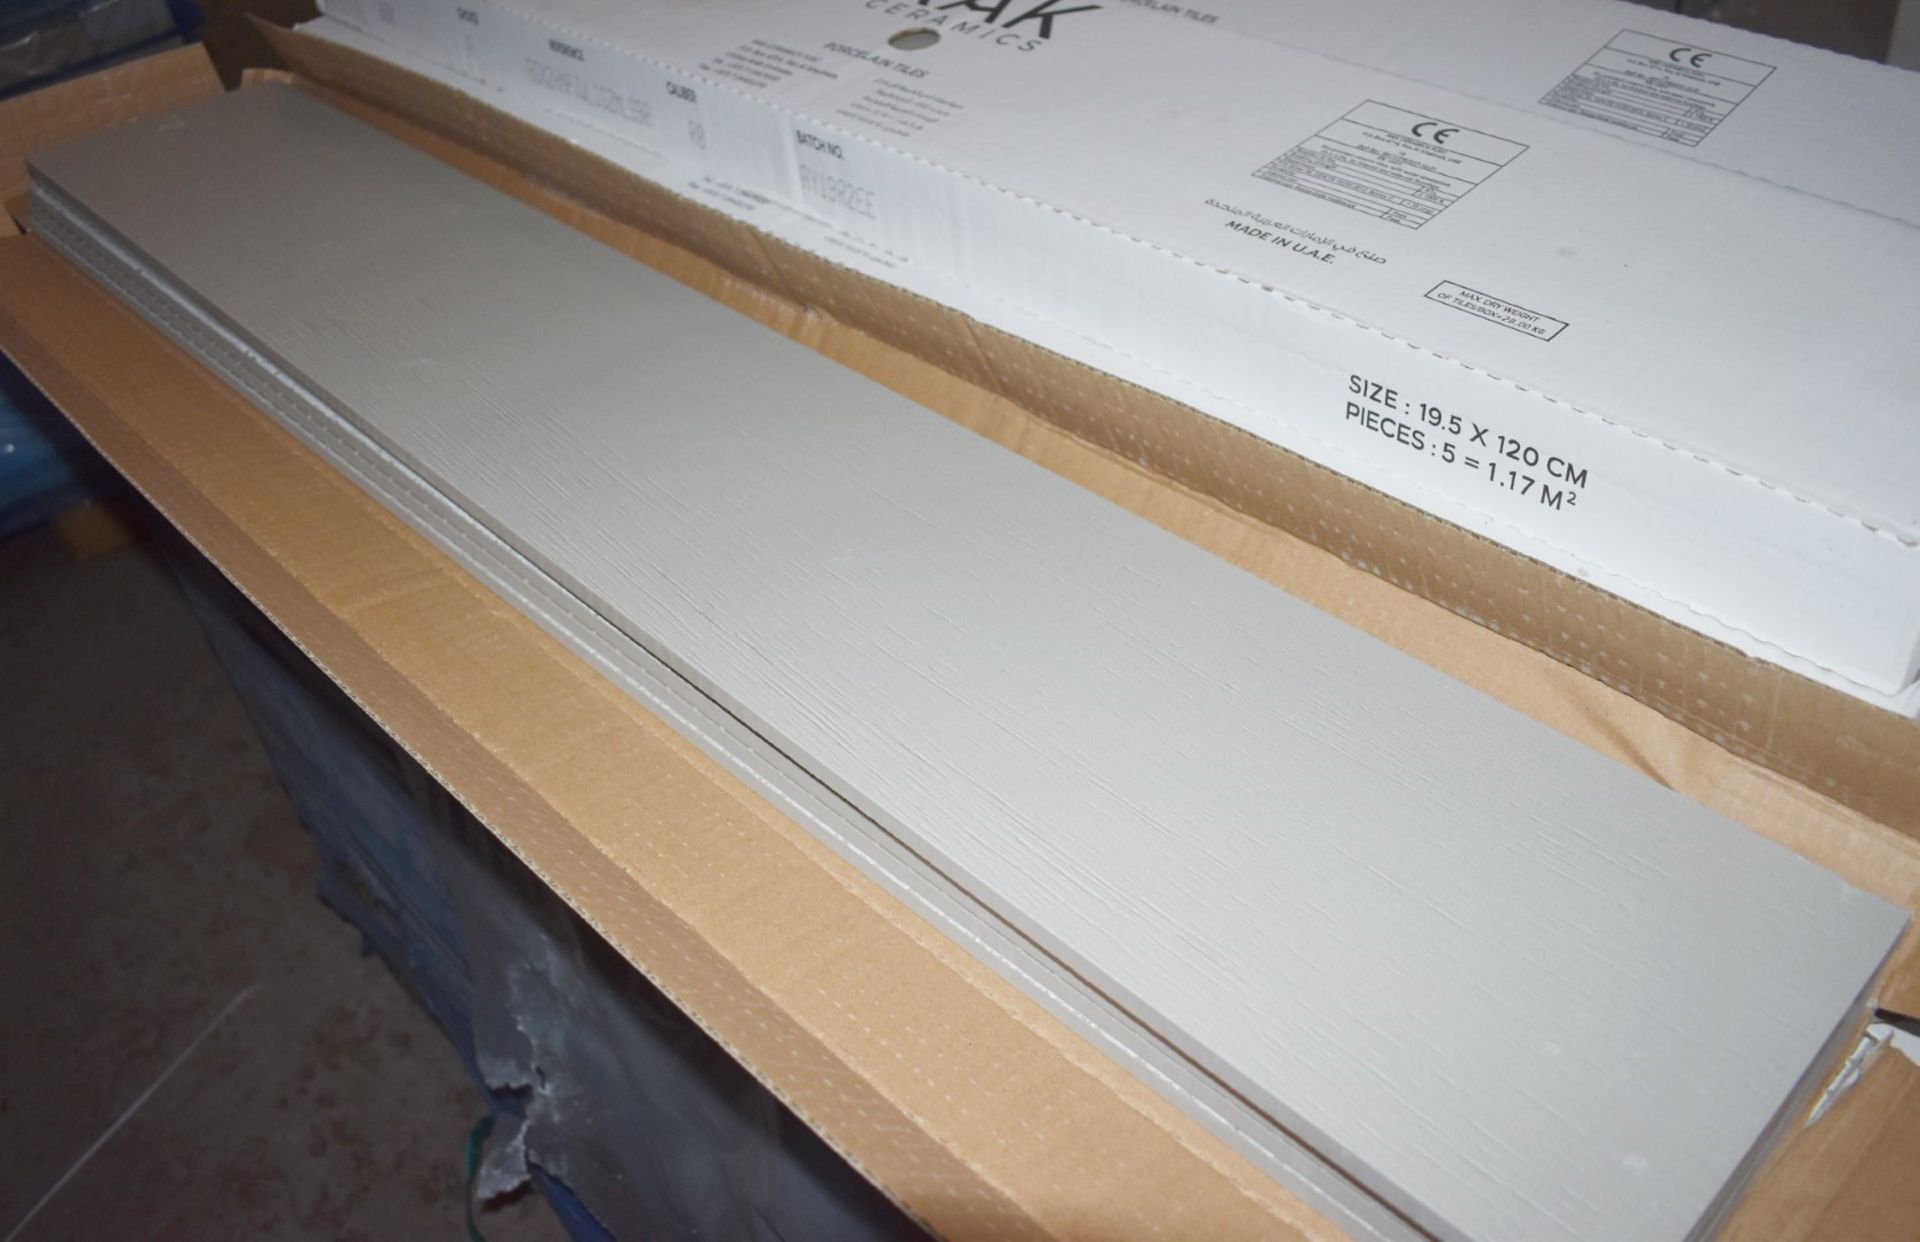 12 x Boxes of RAK Porcelain Floor or Wall Tiles - M Project Wood Design in Light Grey - 19.5 x 120 c - Image 3 of 7